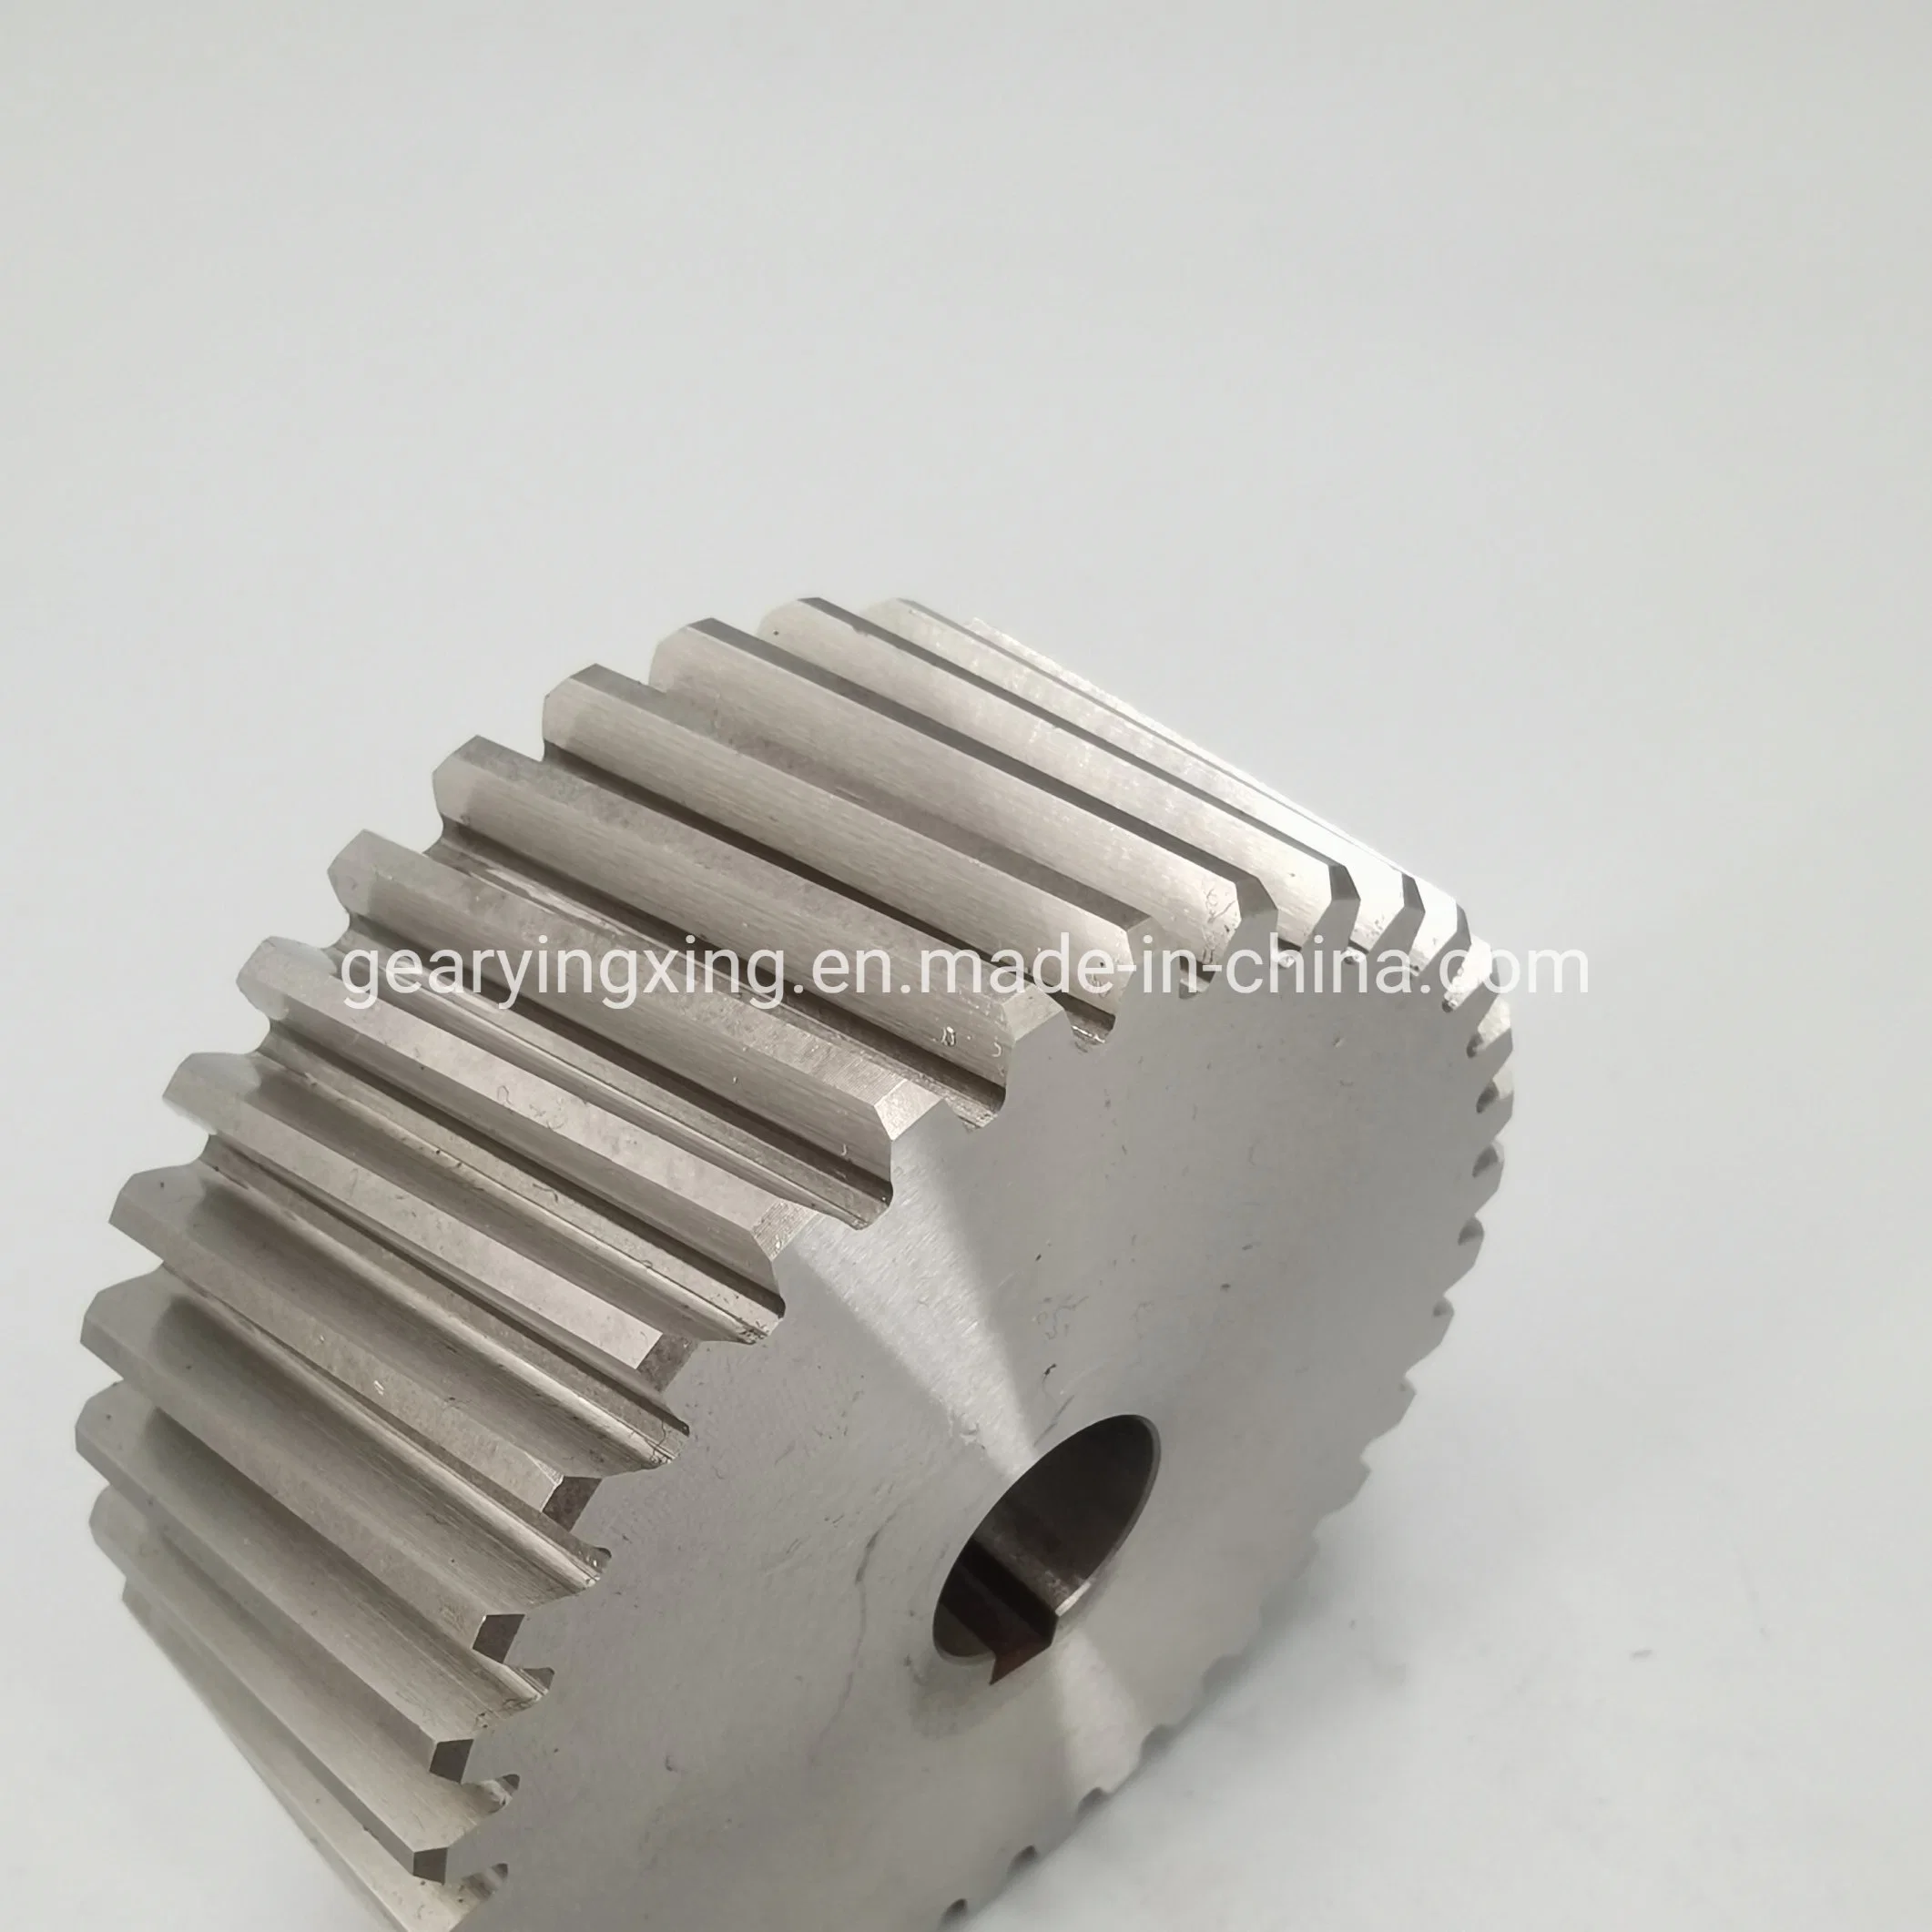 M2.5 Z36 Customized Gear for Drilling Machine/ Reducer/ Pile-Driver Tower/ Oil Machinery